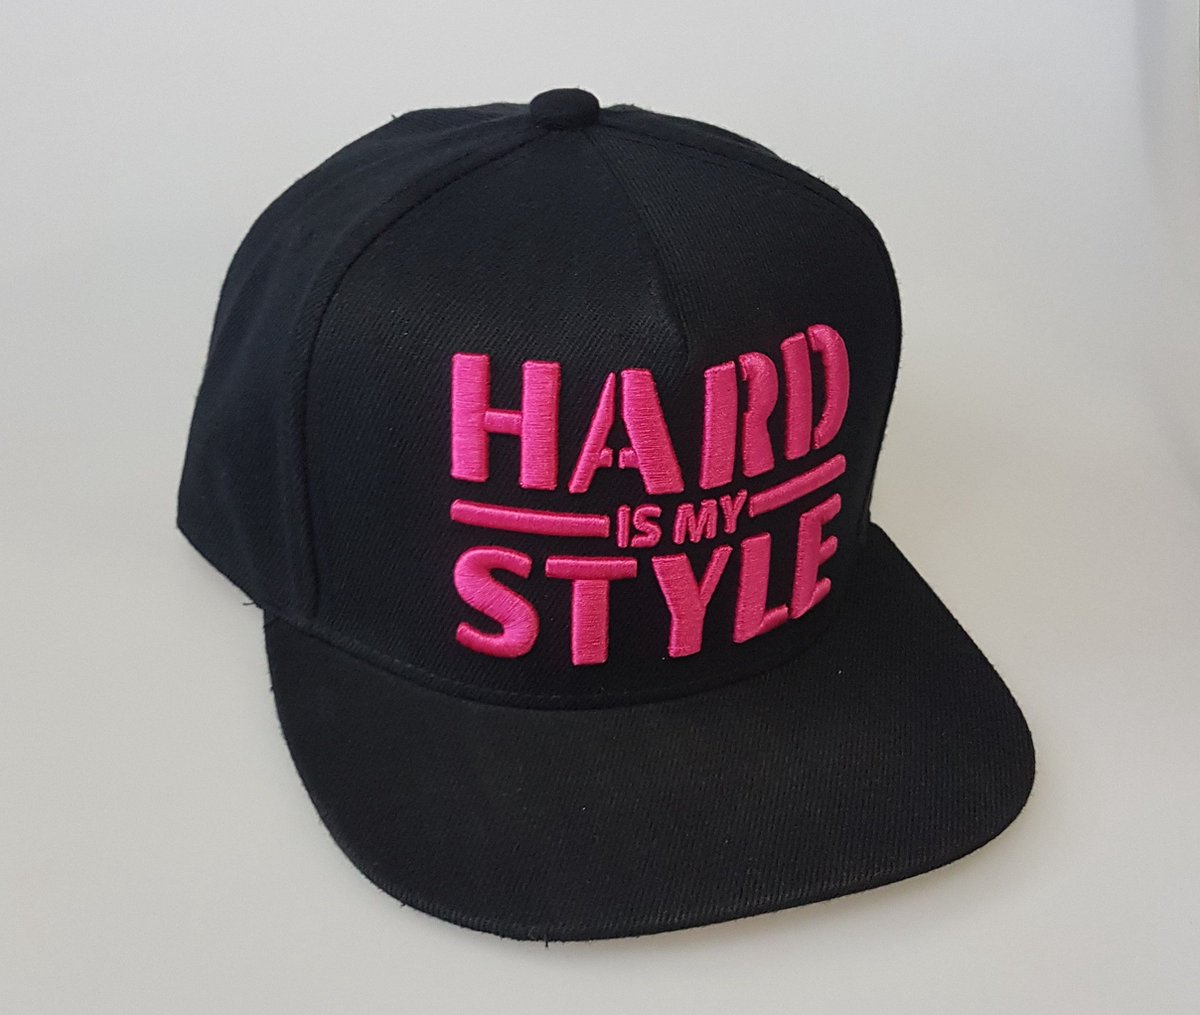 Snapback - Casquette - Casquette Festival - Hardstyle - Hard is my style -  Zwart - Rose | bol.com